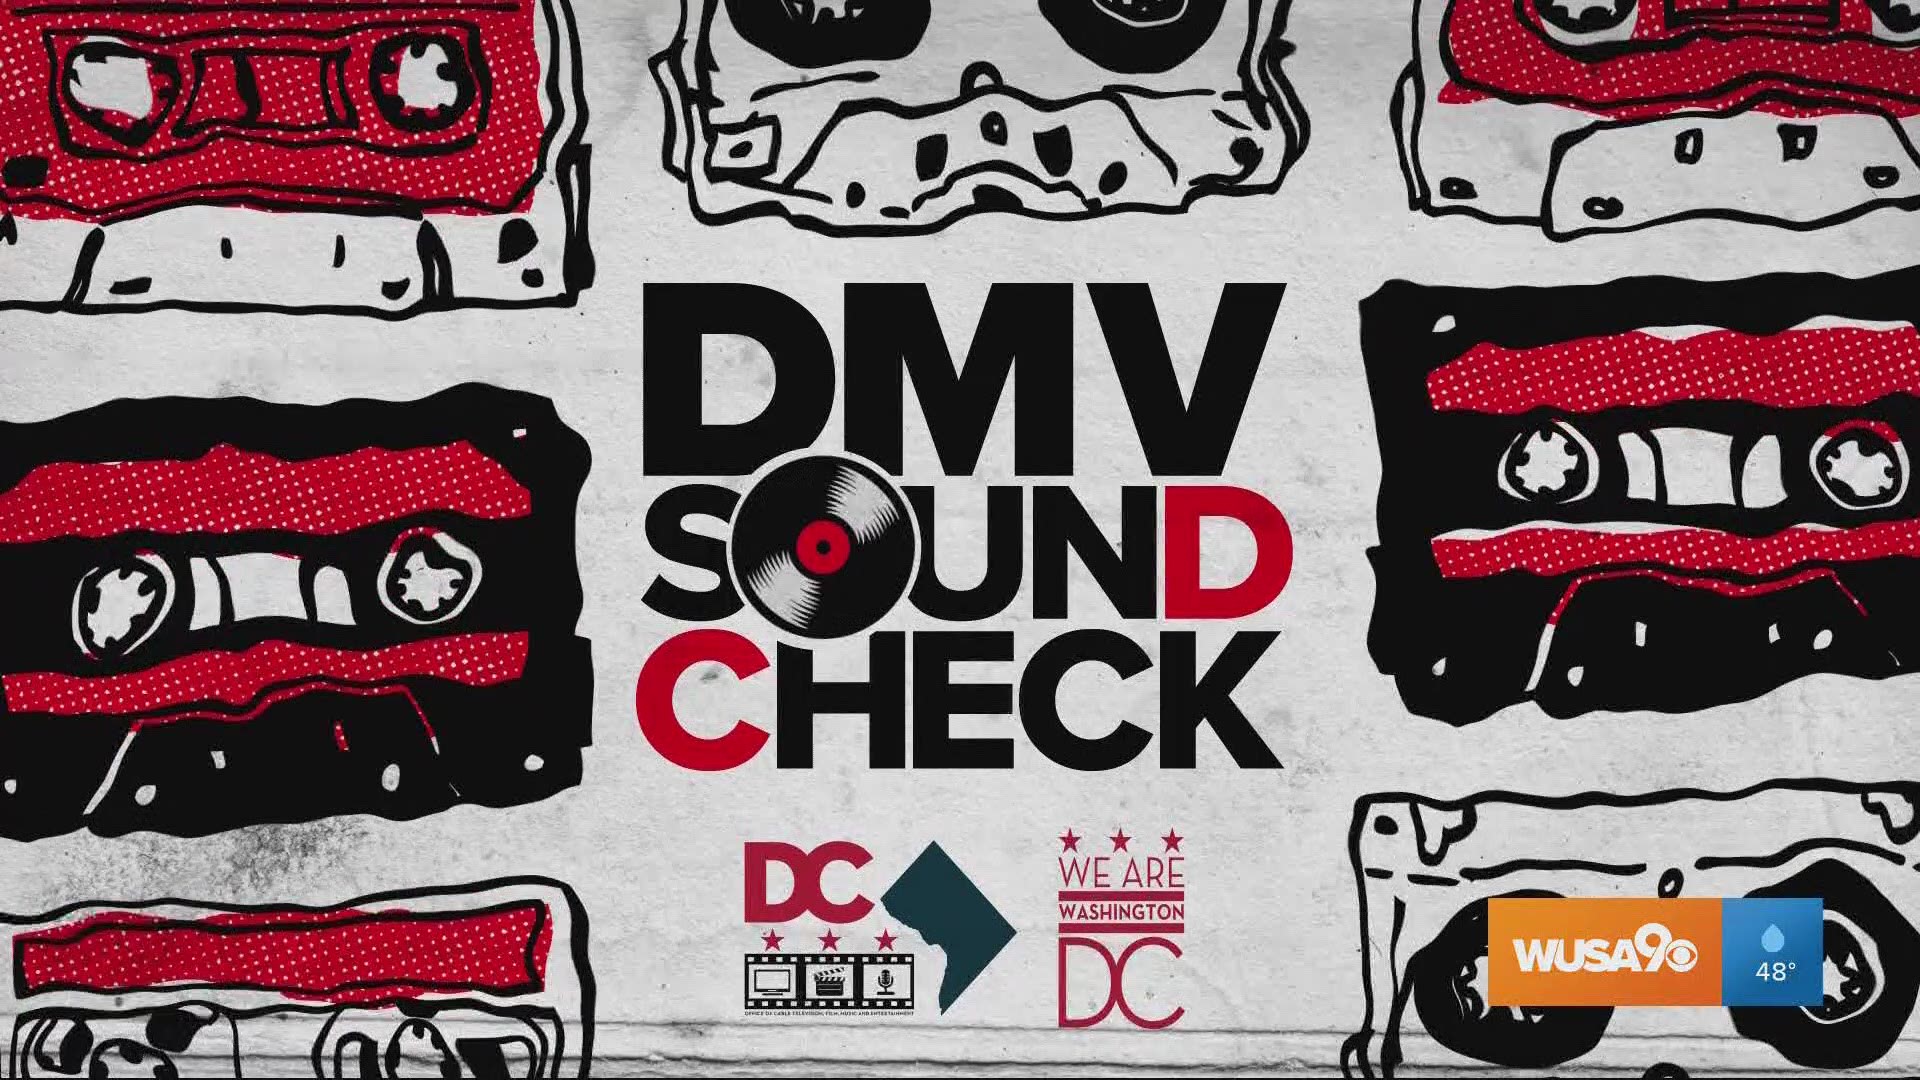 The DMV Soundcheck has a special guest!  Master Gee, founder of the iconic group, The SugarHill Gang stopped by to celebrate the 40th anniversary of Rapper's Delight and give a performance to the DMV audience.  You can see more videos from DMV Soundcheck at wusa9.com/DMVSoundcheck.